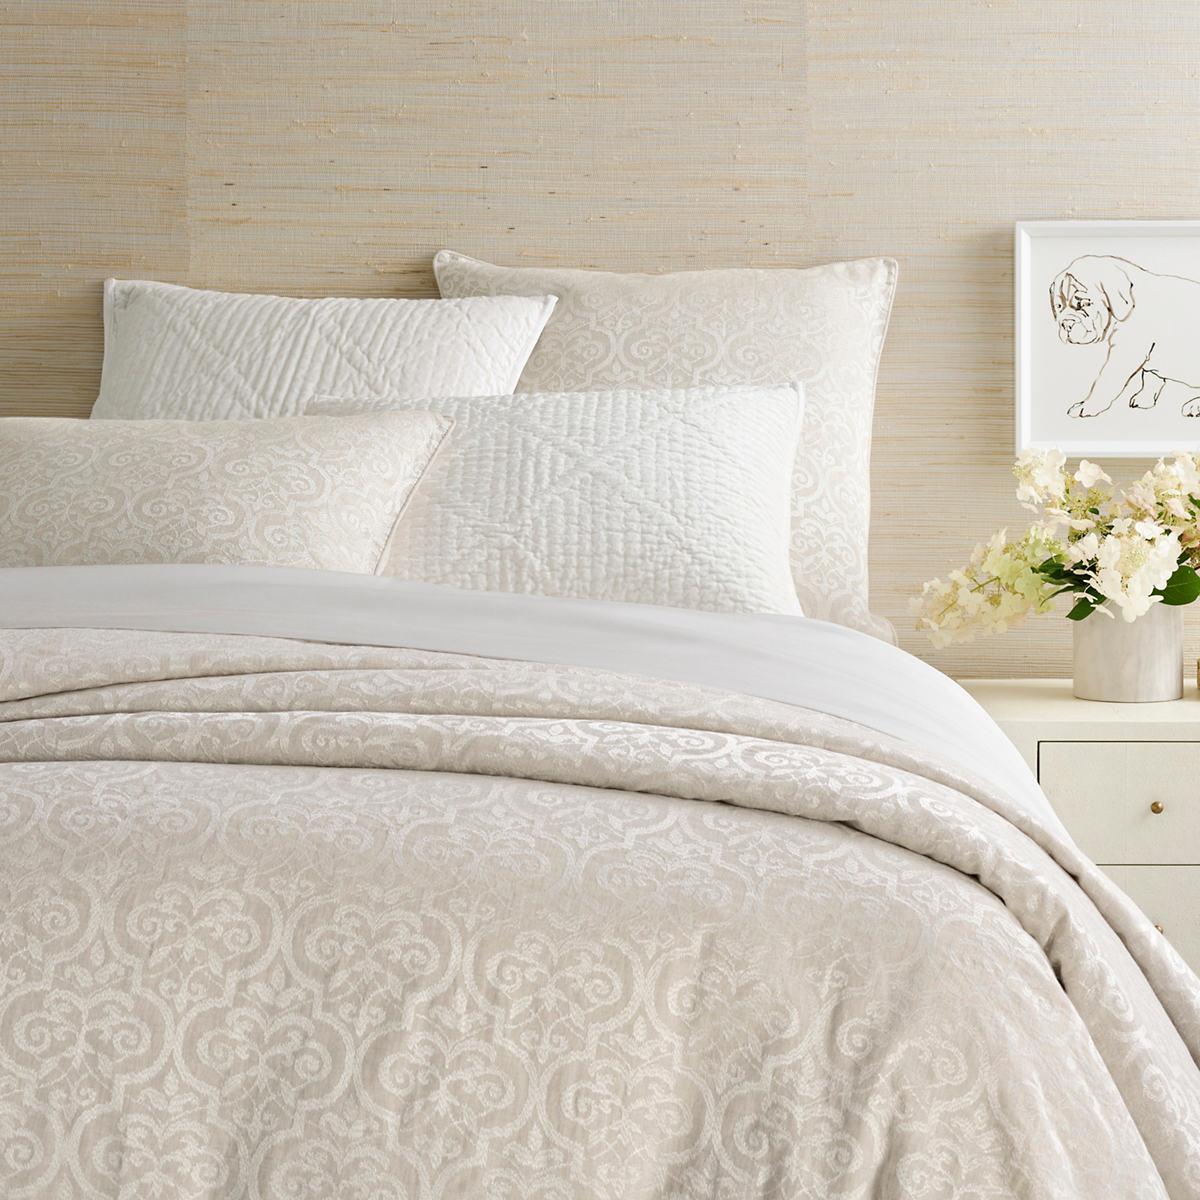 Gwendolyn Embroidered Ivory Duvet Cover The Outlet